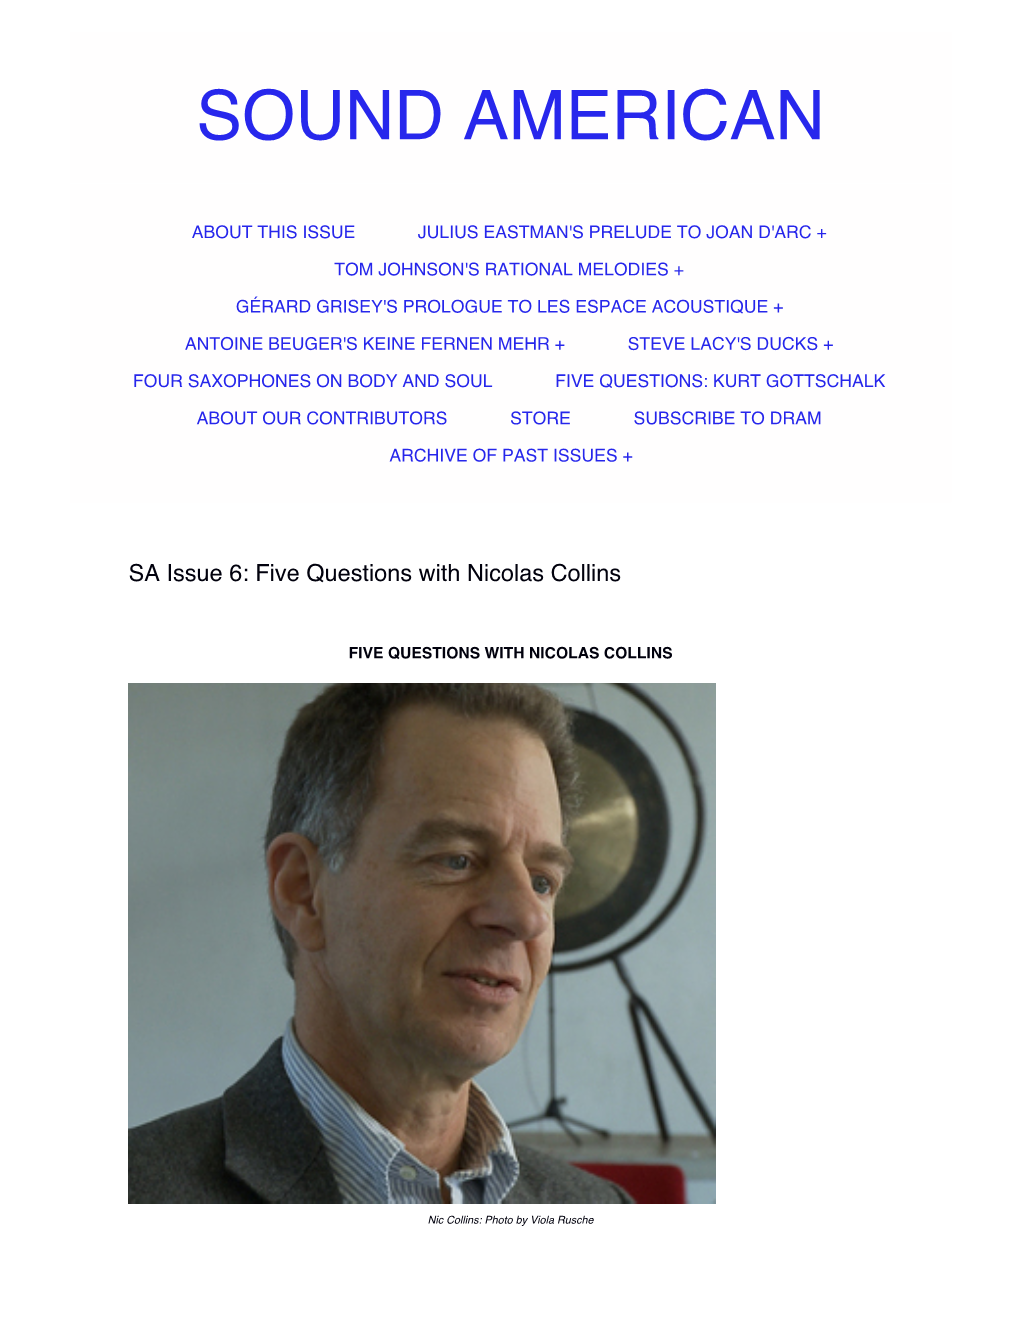 Sound American | SA Issue 6: Five Questions with Nicolas Collins